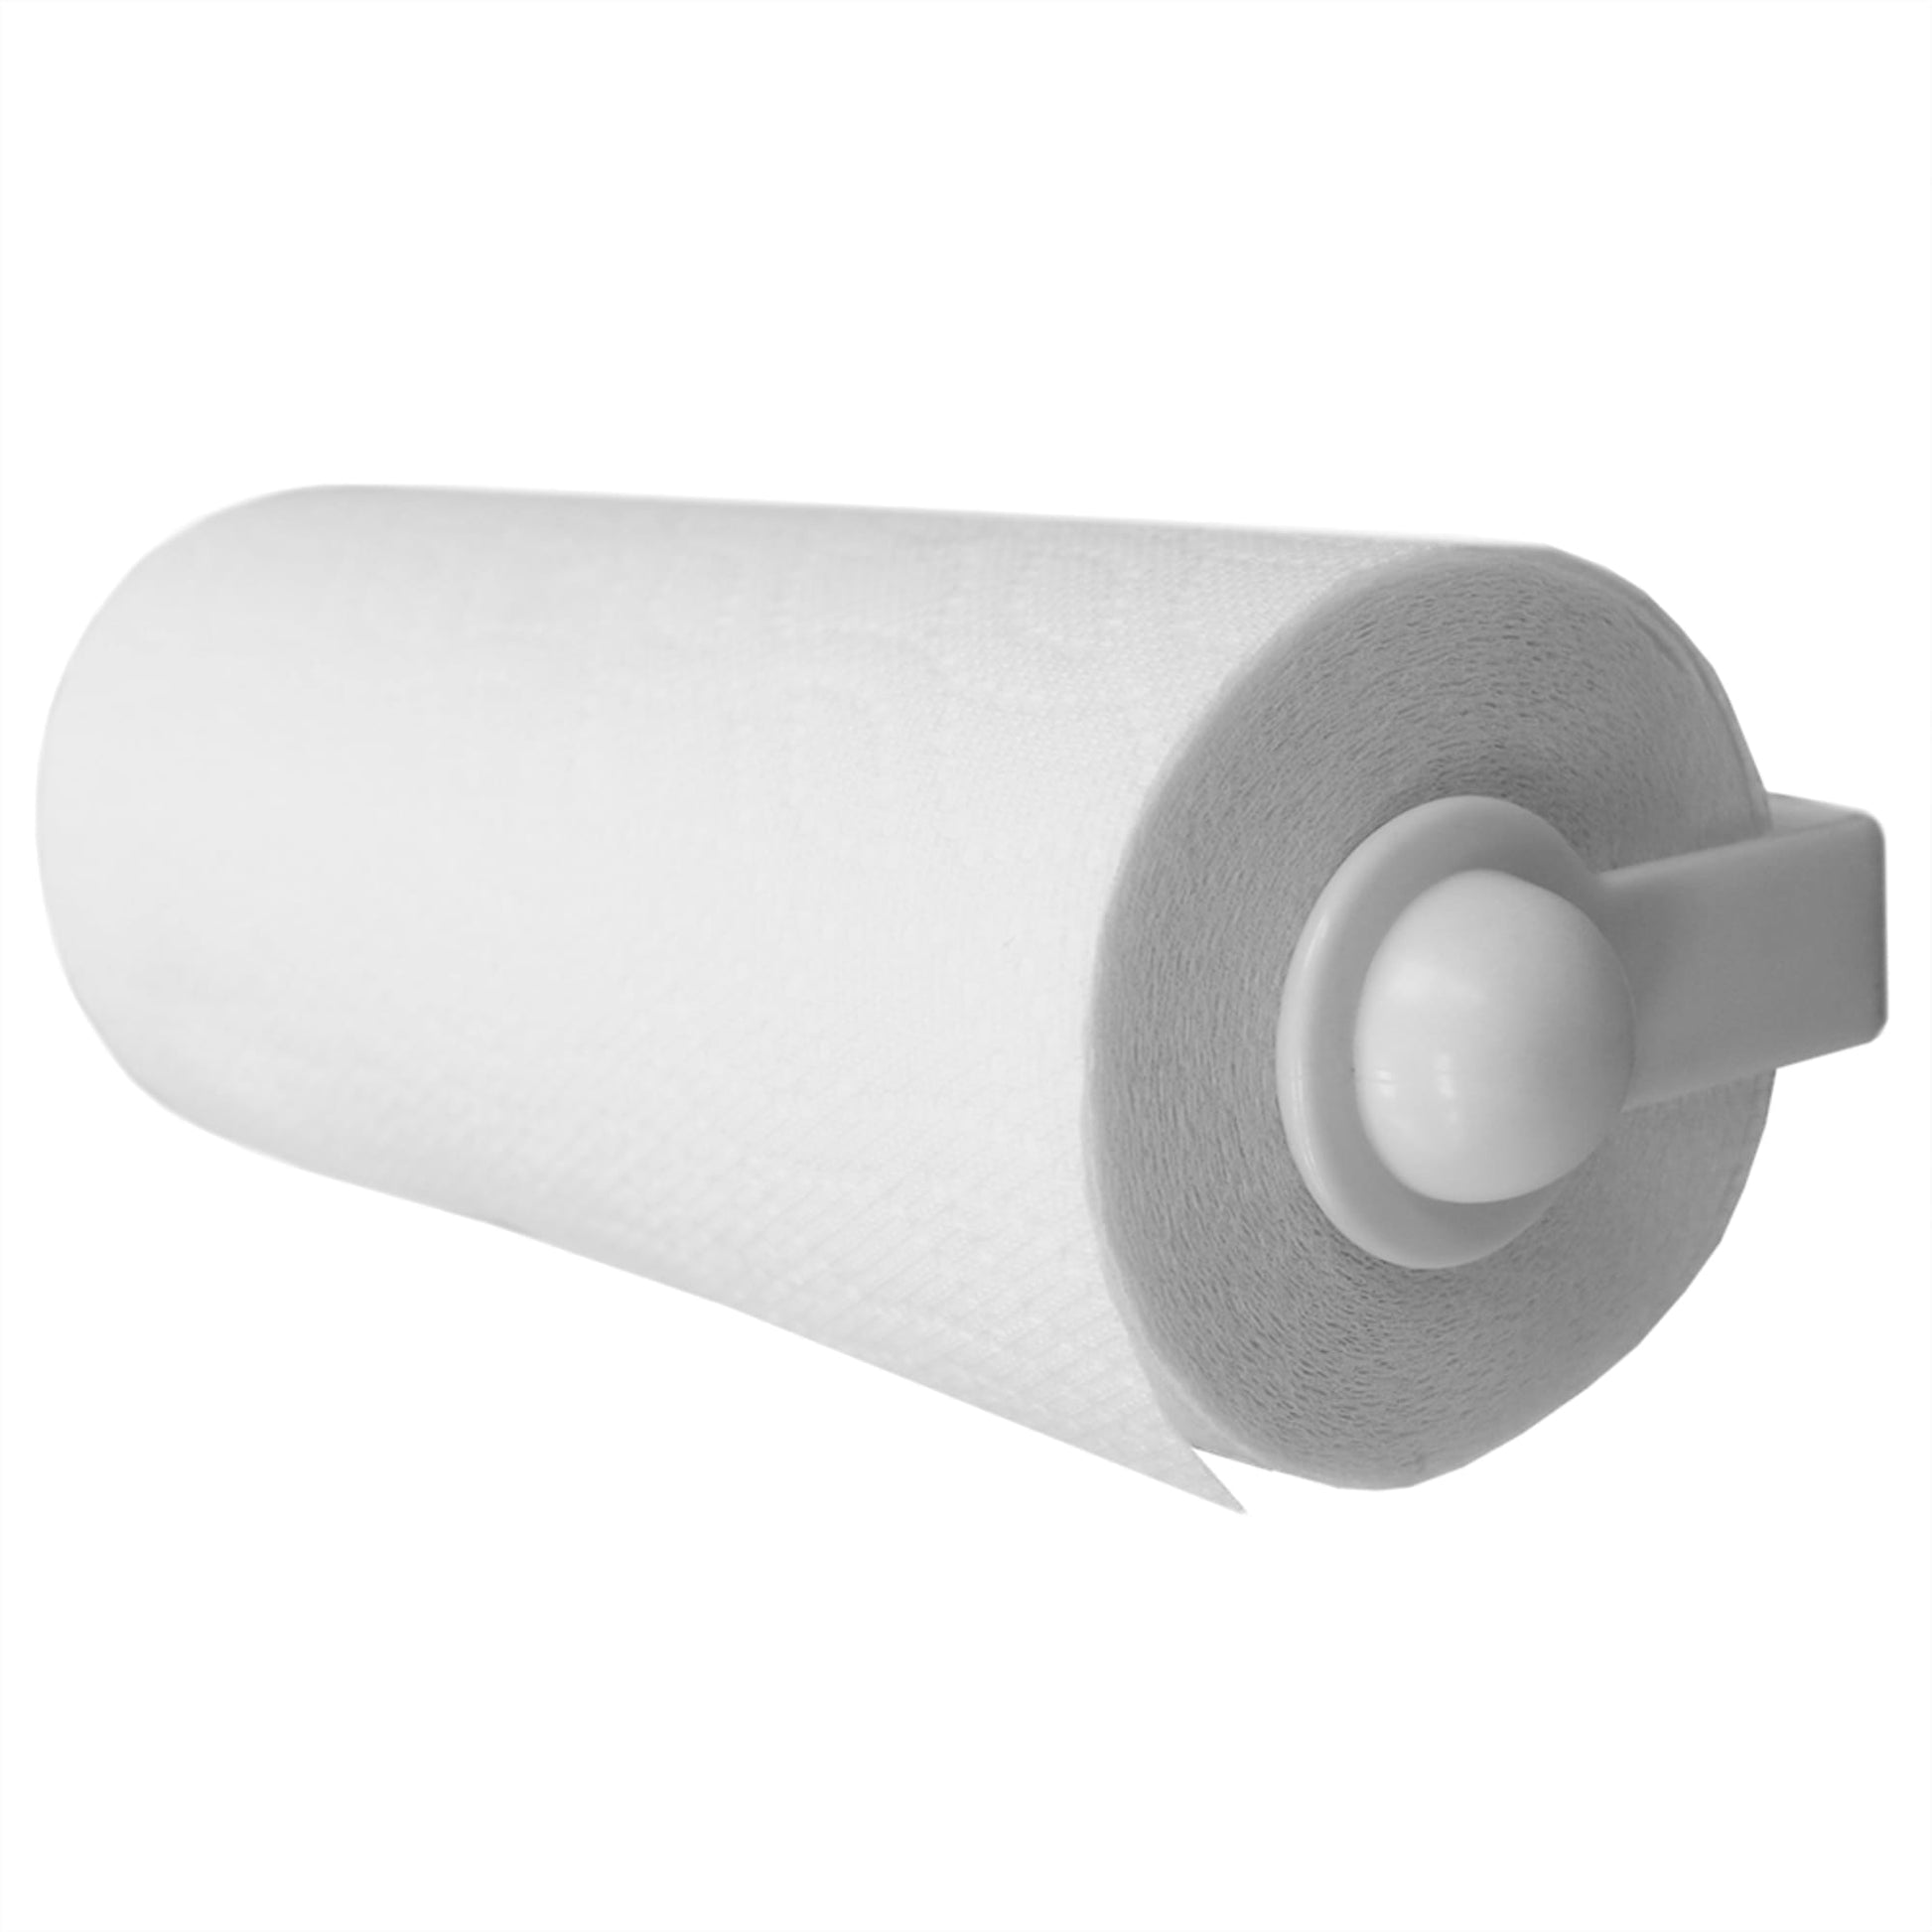 Mainstays Plastic Wall-Mounted Paper Towel Holder, White 